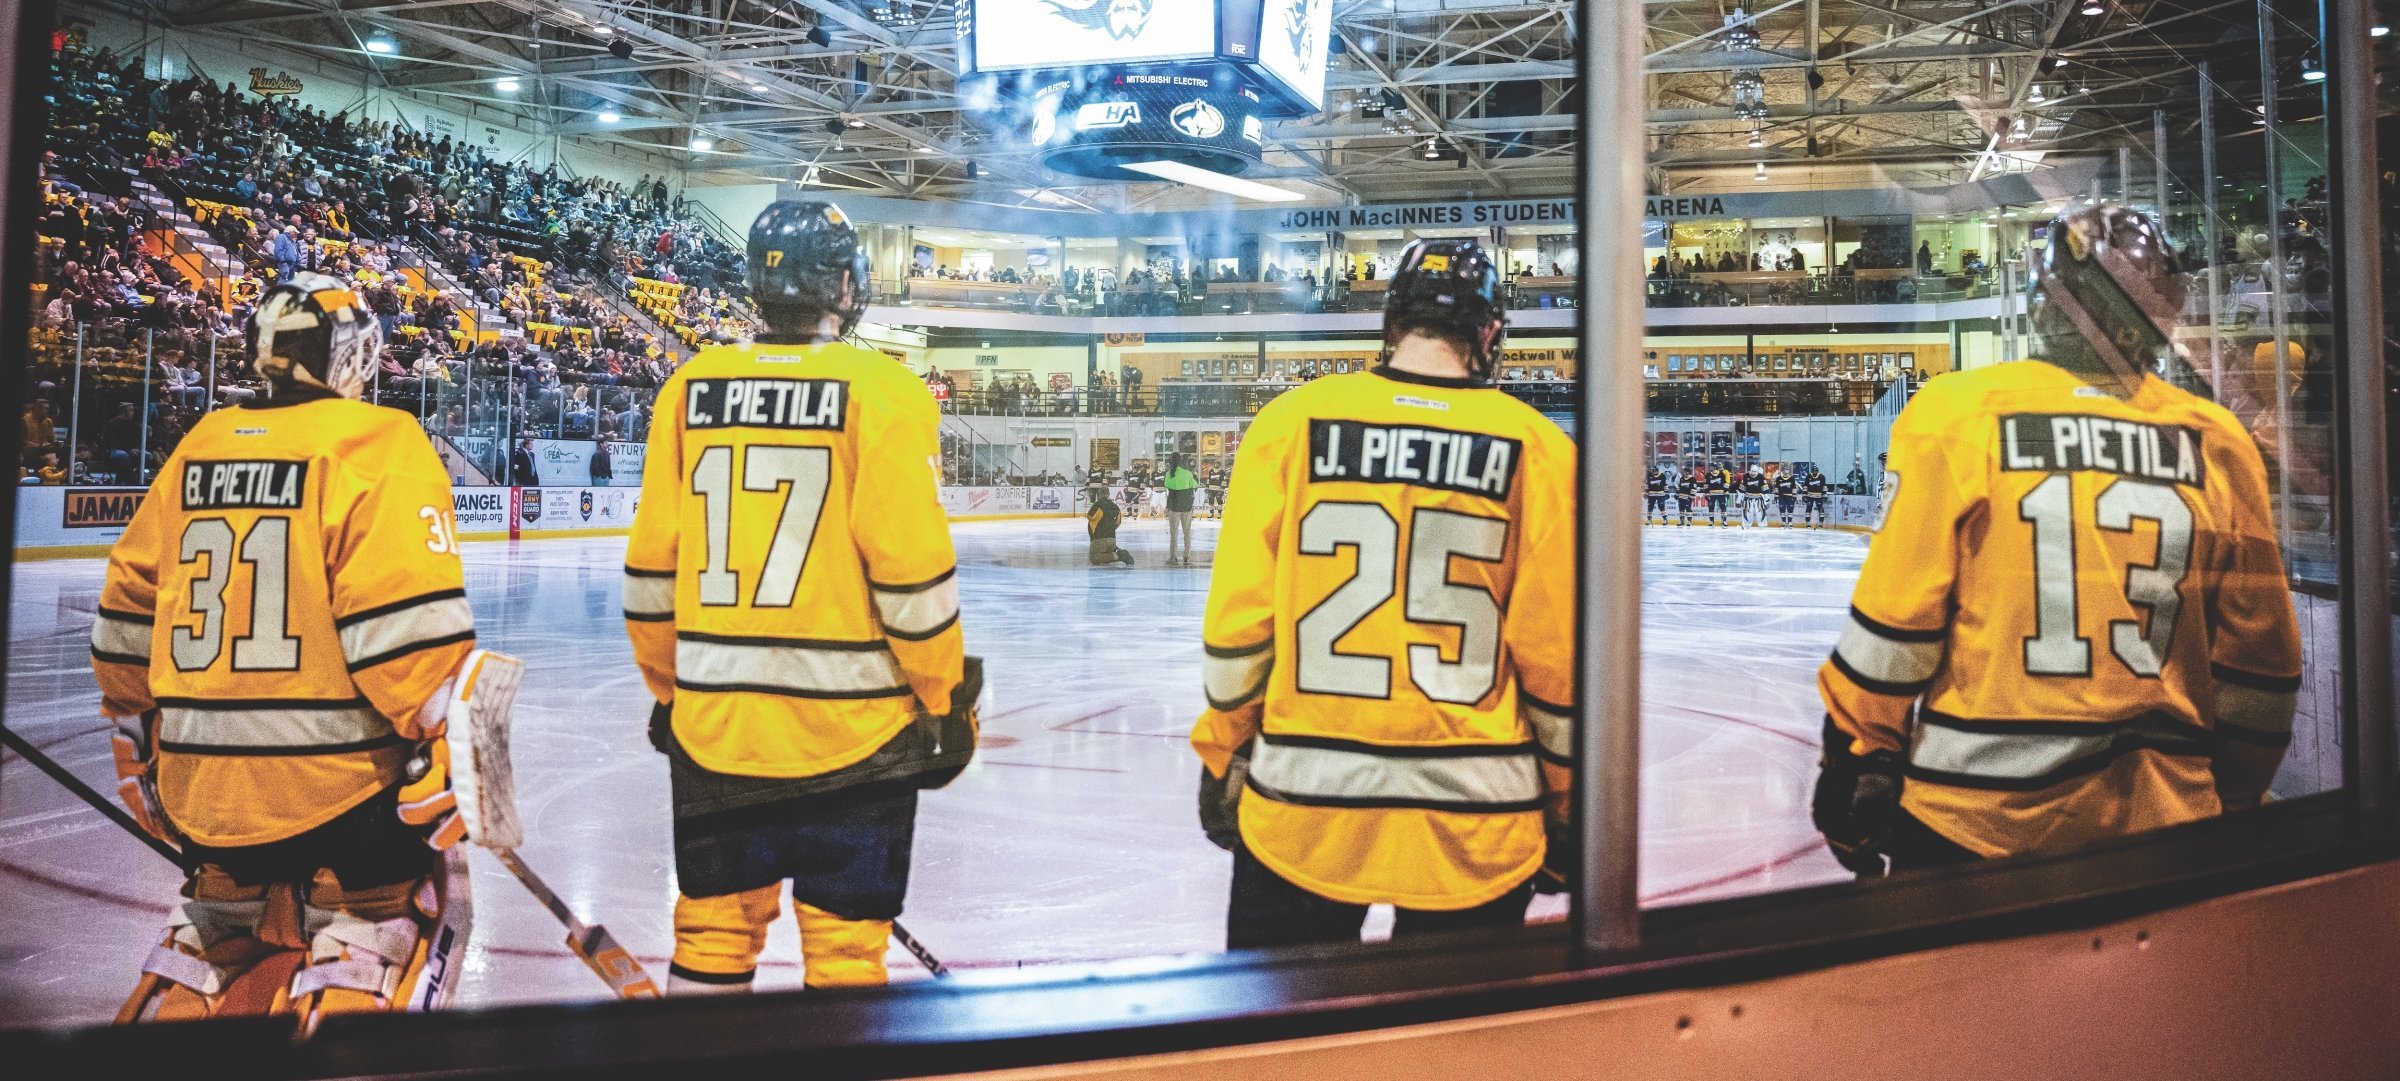 The four Pietila's from the back during lineup before a game.